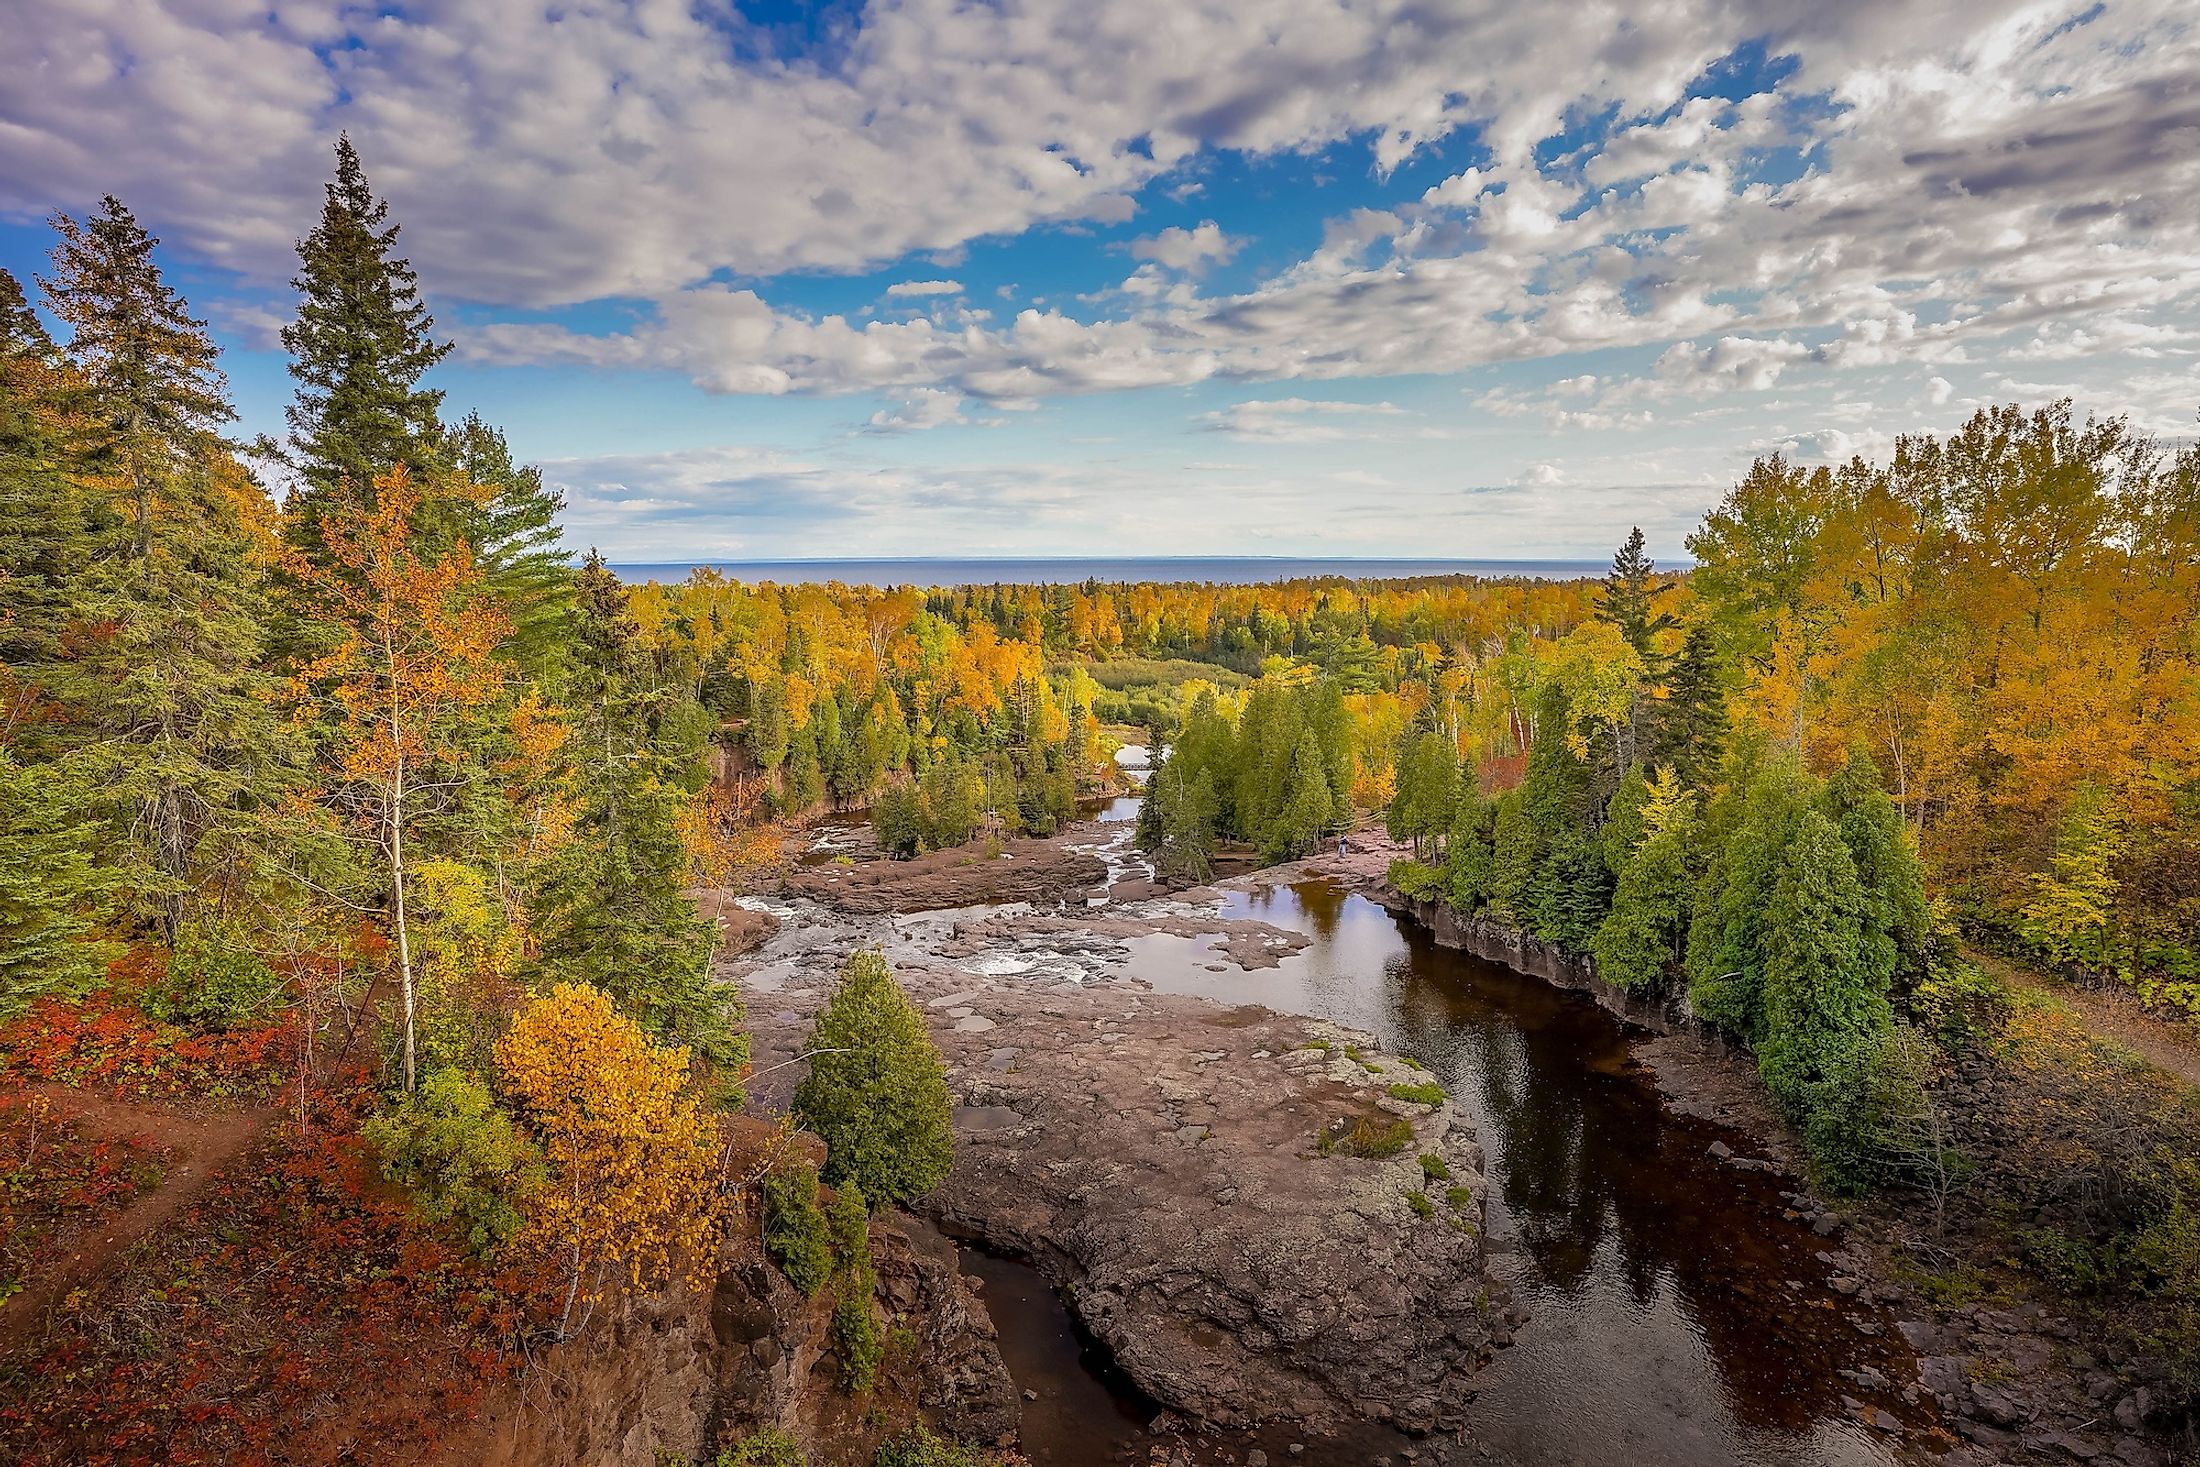 Fall scenery at Gooseberry Falls State Park in Minnesota.